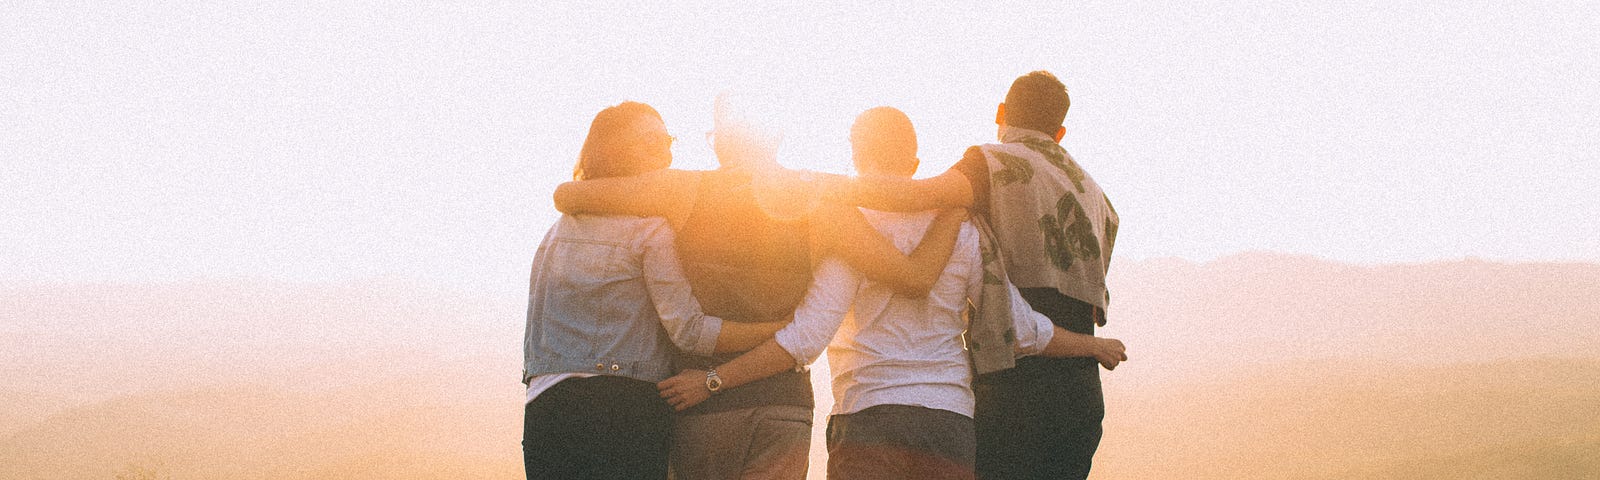 Four friends face away from the camera with their arms around each other. They look off into the distant landscape and into the sunlight.